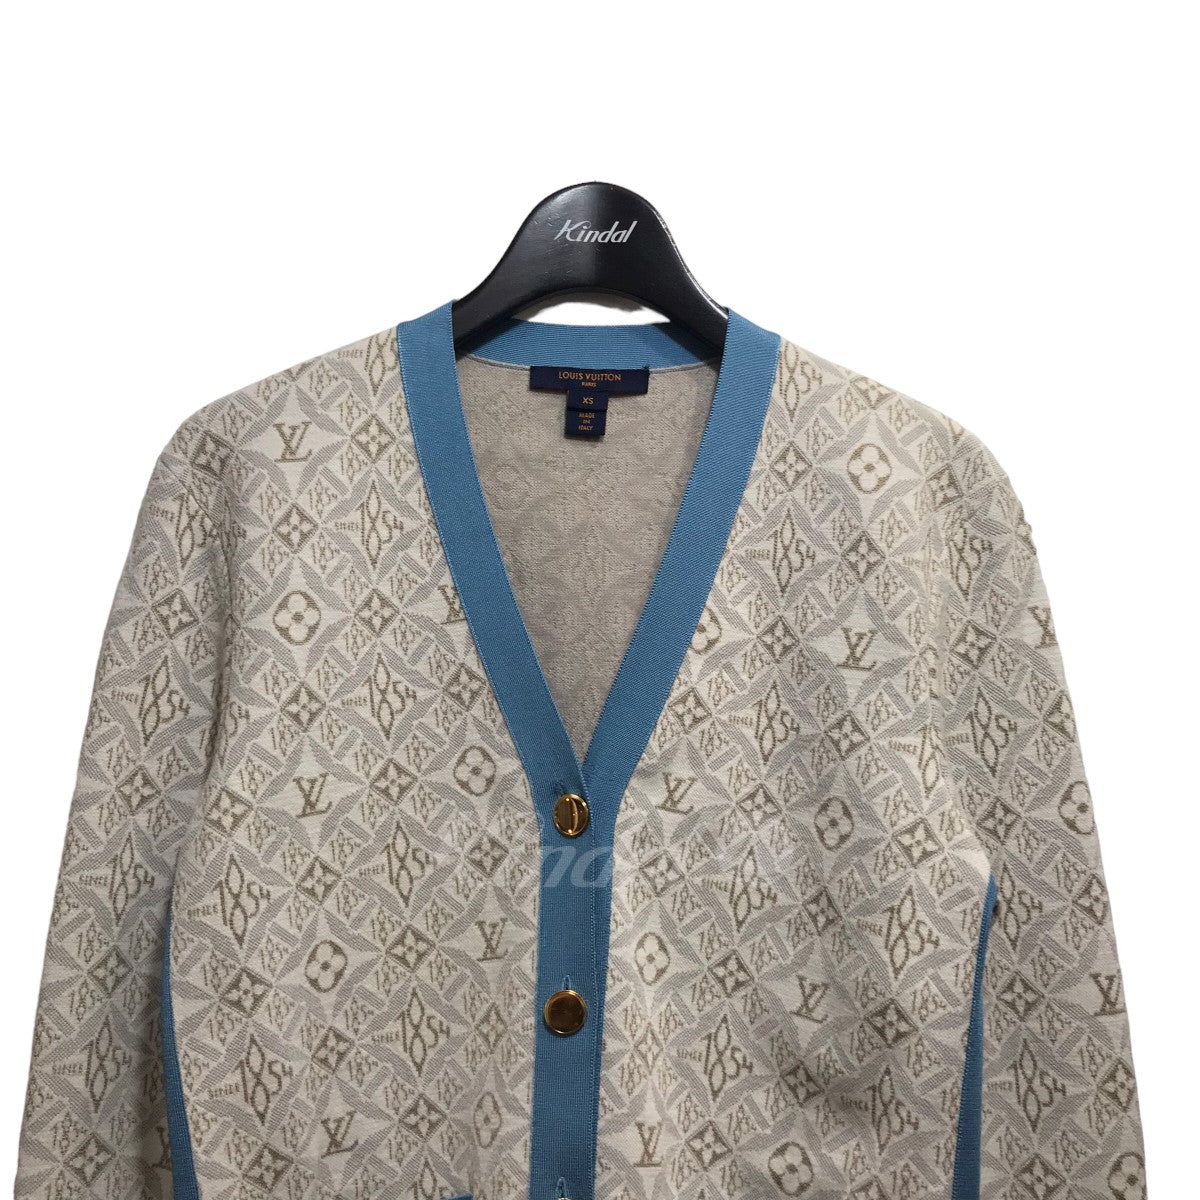 LOUIS VUITTON(ルイヴィトン) 22SS「Since 1854 Contrast Trim Cardigan」カーディガン